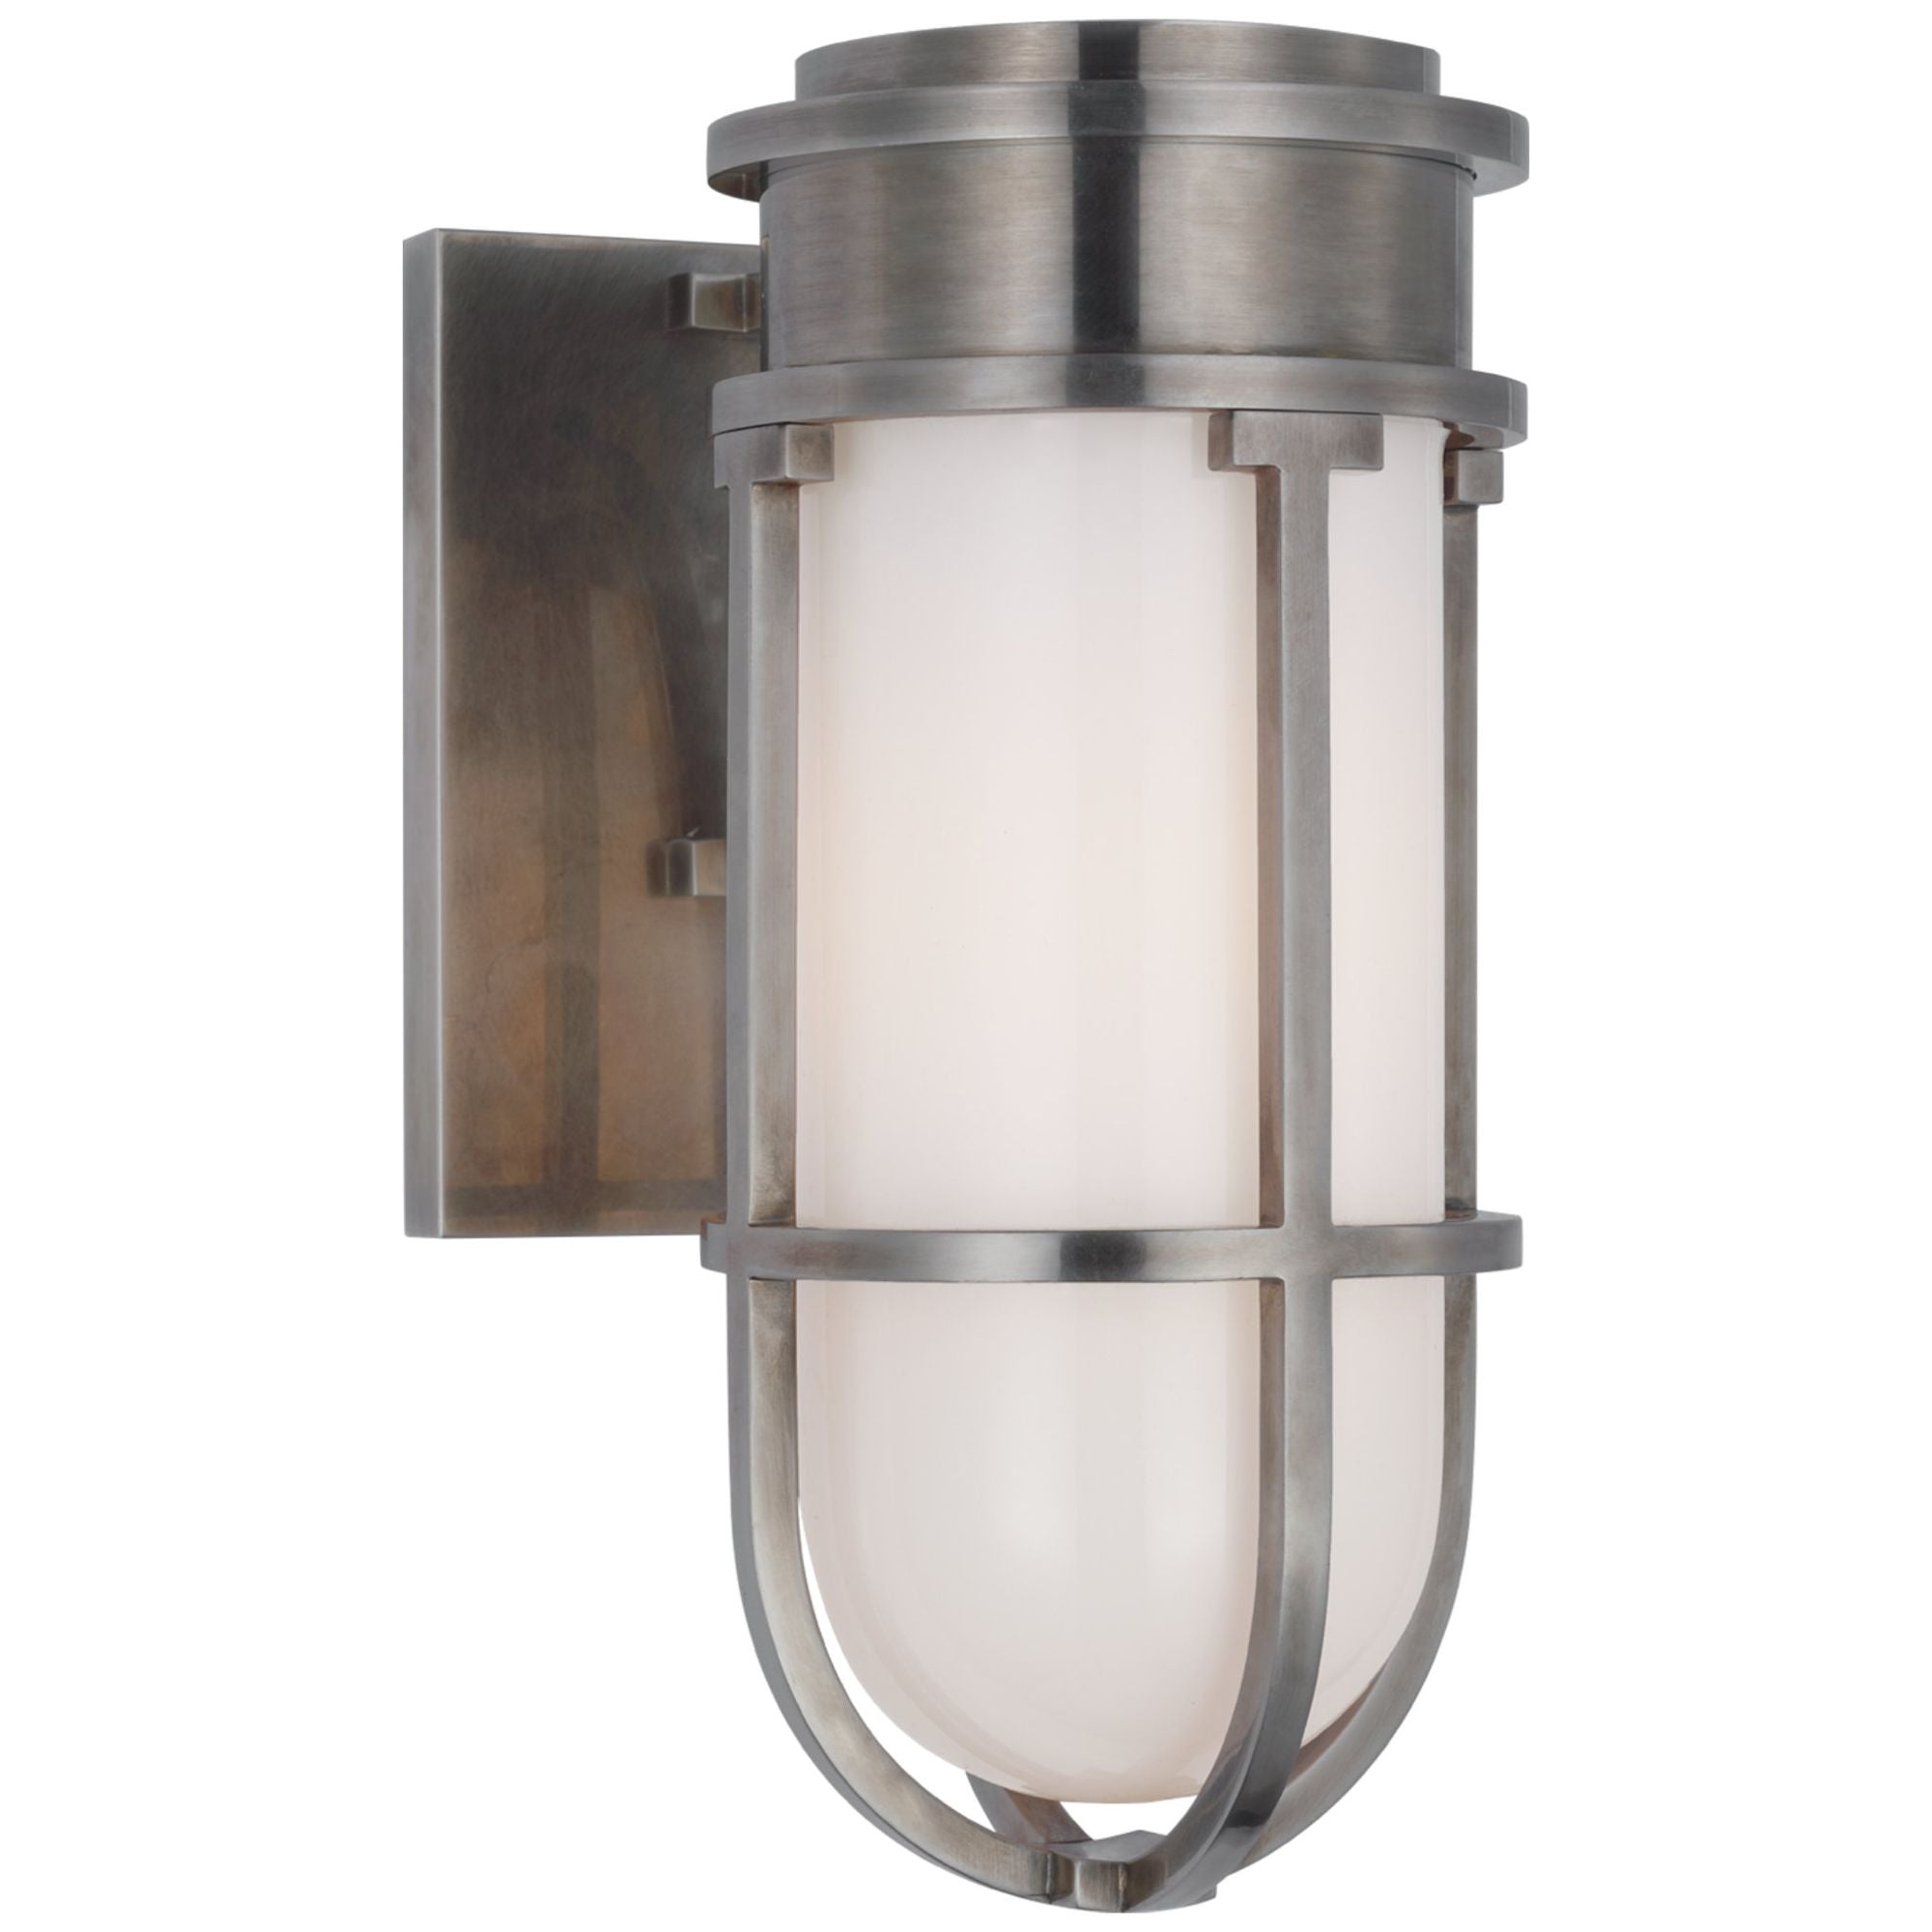 Chapman & Myers Gracie Tall Bracketed Sconce in Antique Nickel with White Glass